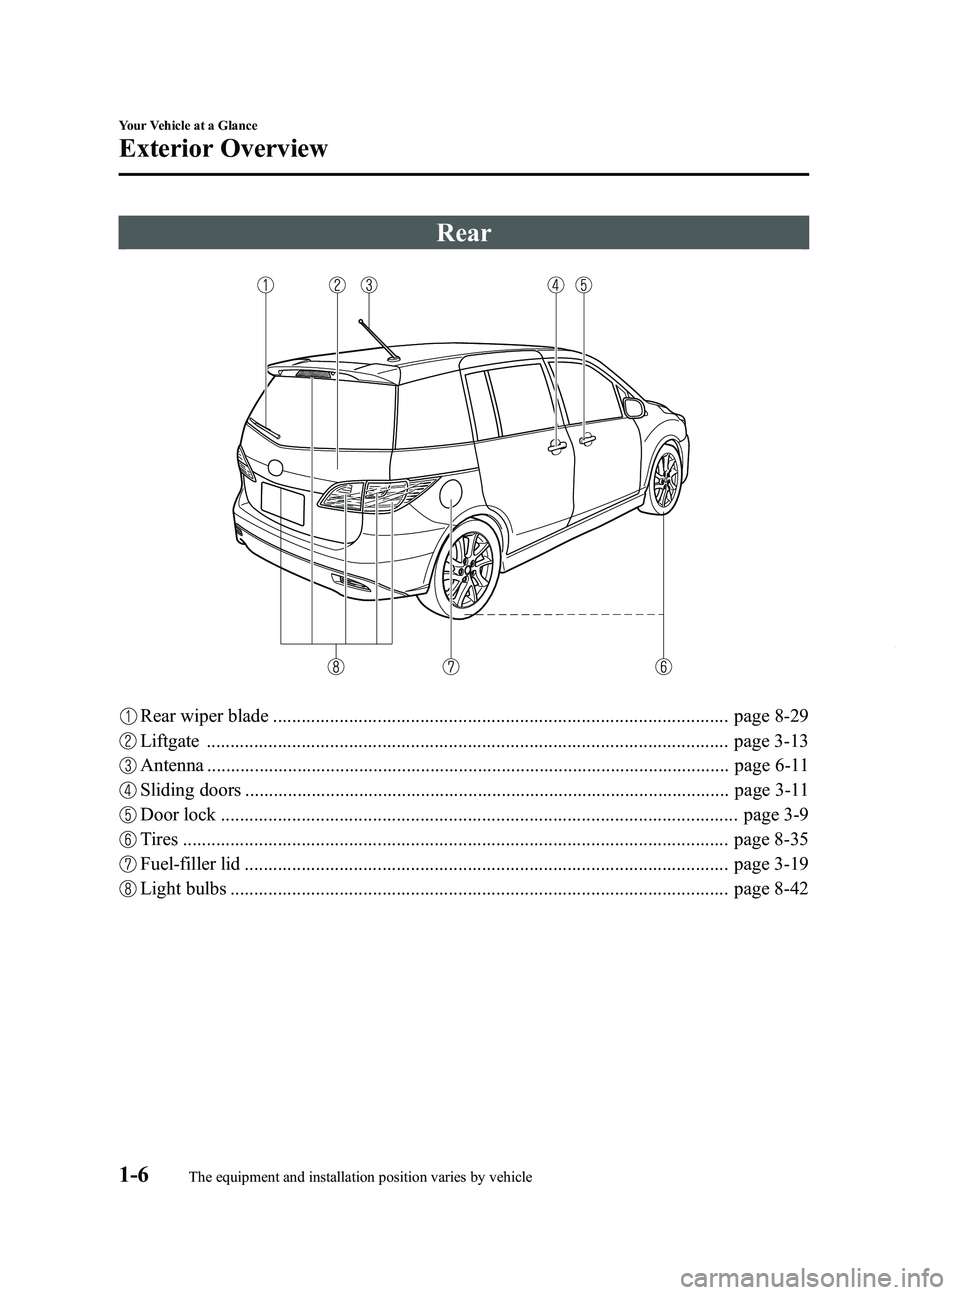 MAZDA MODEL 5 2014  Owners Manual Black plate (12,1)
Rear
Rear wiper blade ................................................................................................ page 8-29
Liftgate ...........................................